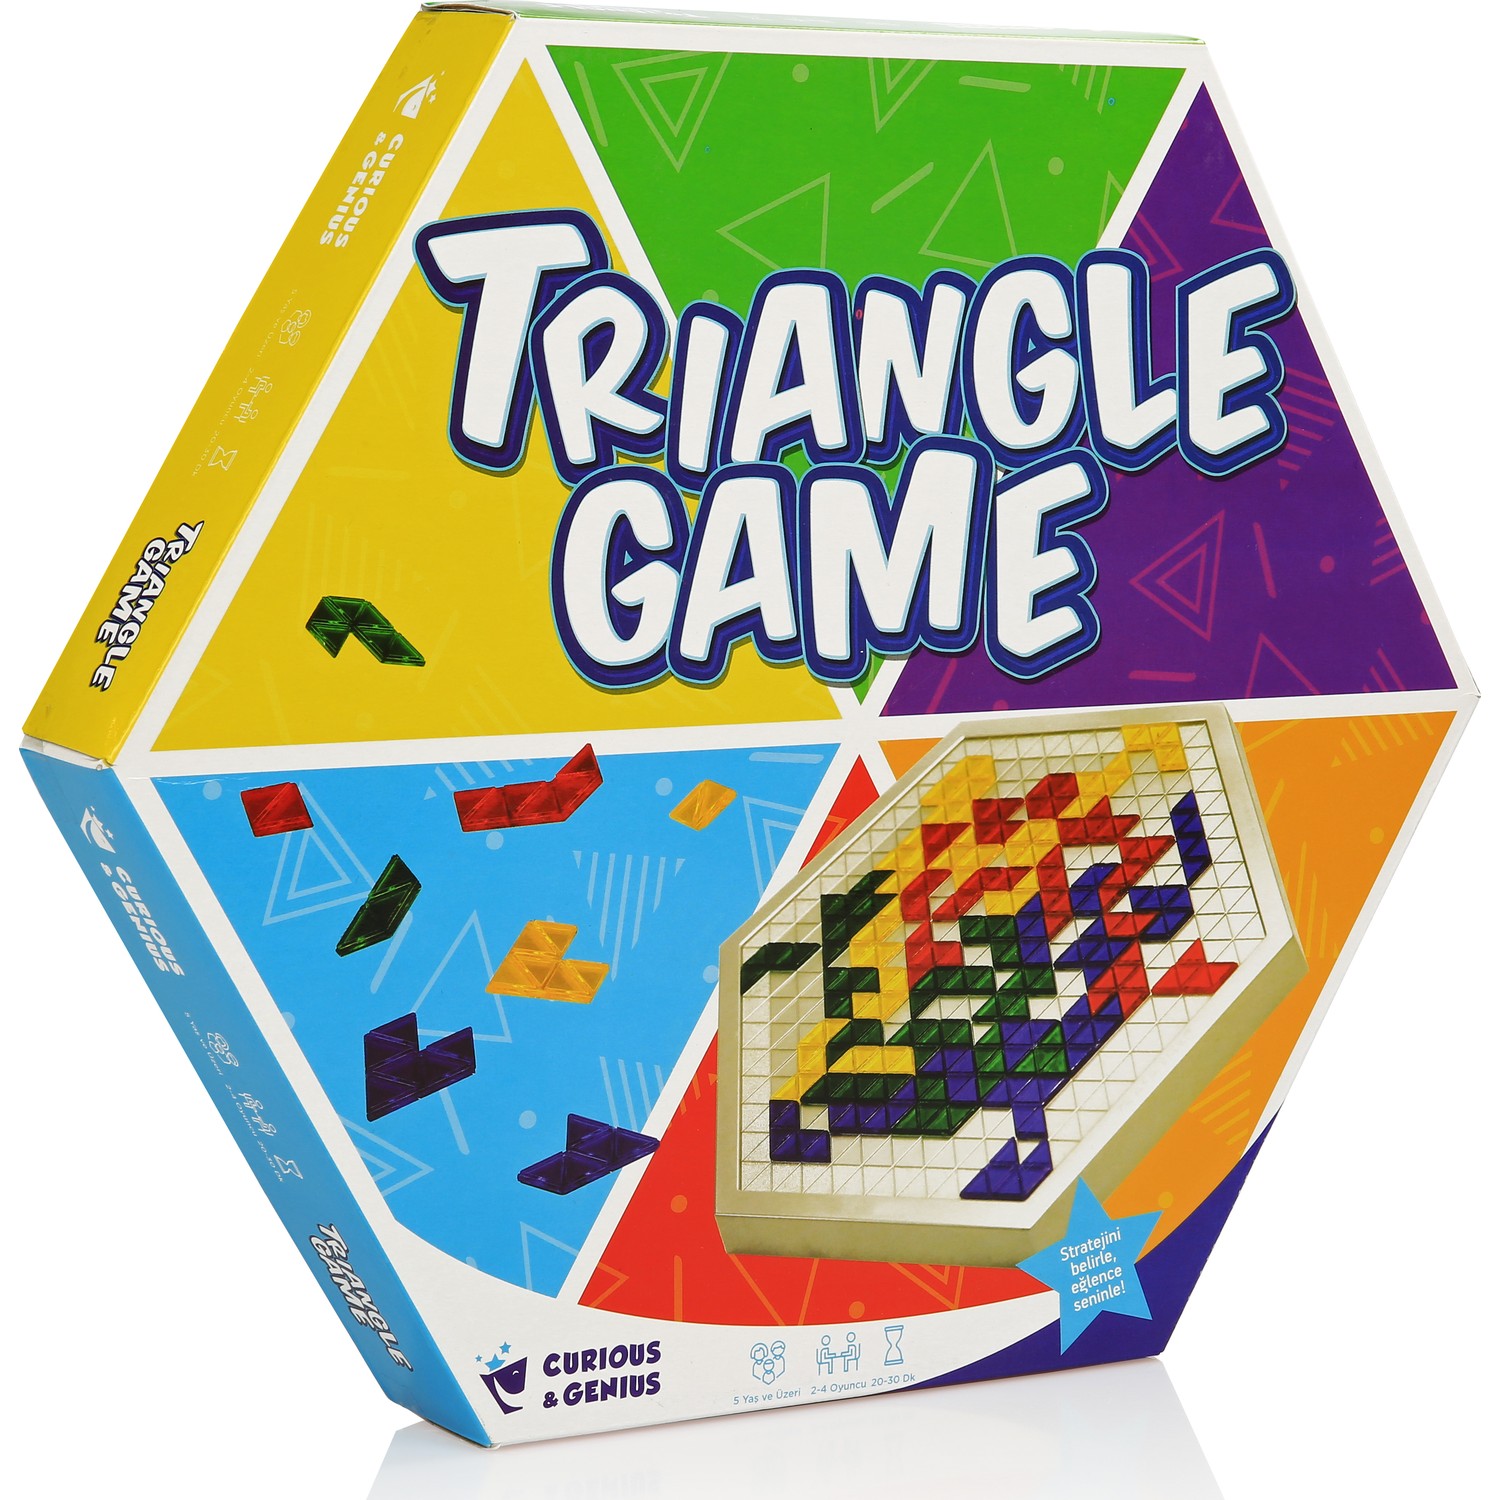 Triangle Game